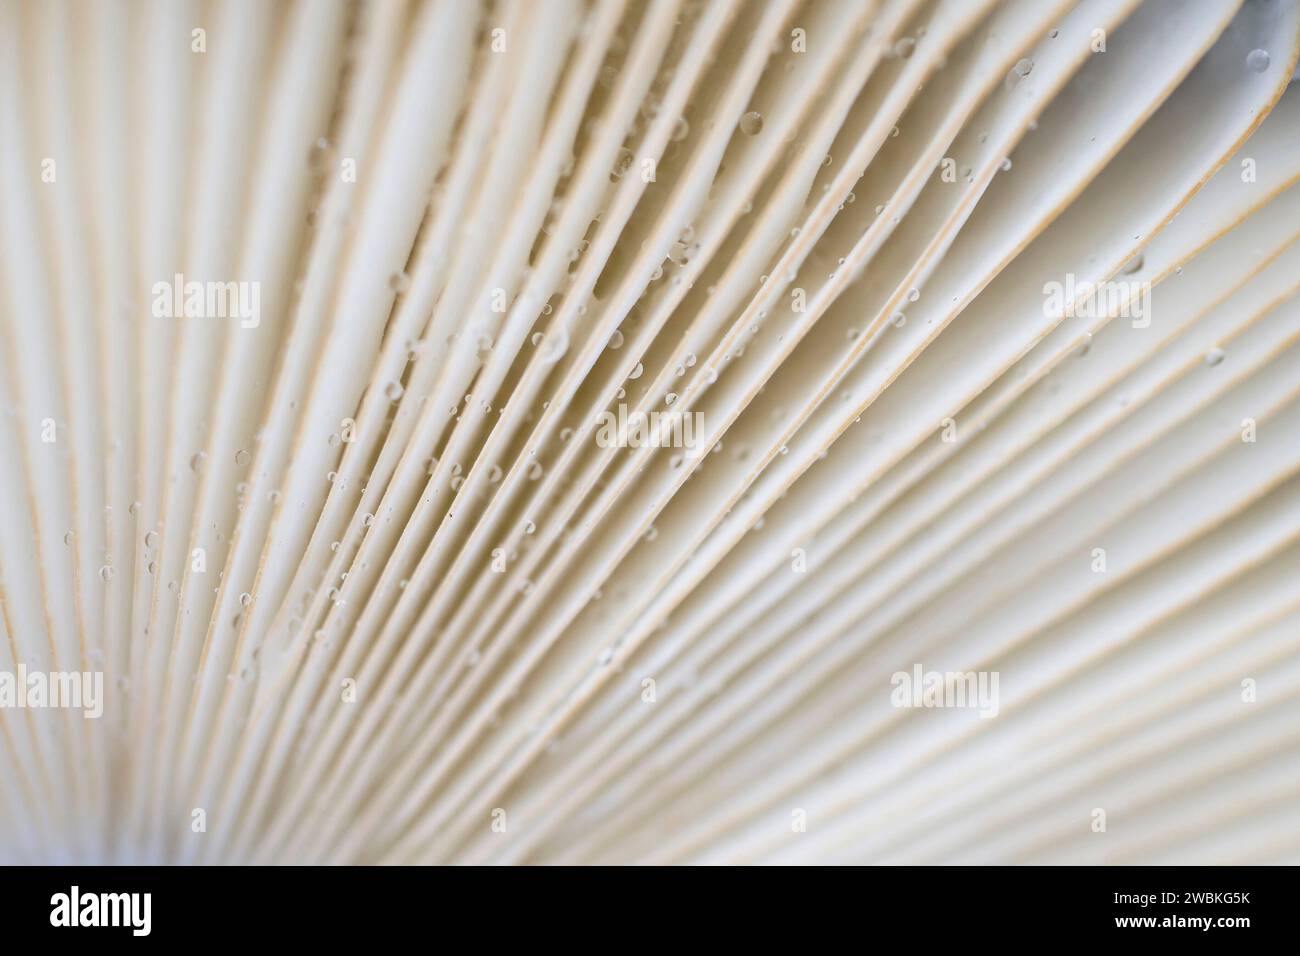 Mushroom cap from below, lamellae with guttation droplets, close-up, Germany Stock Photo